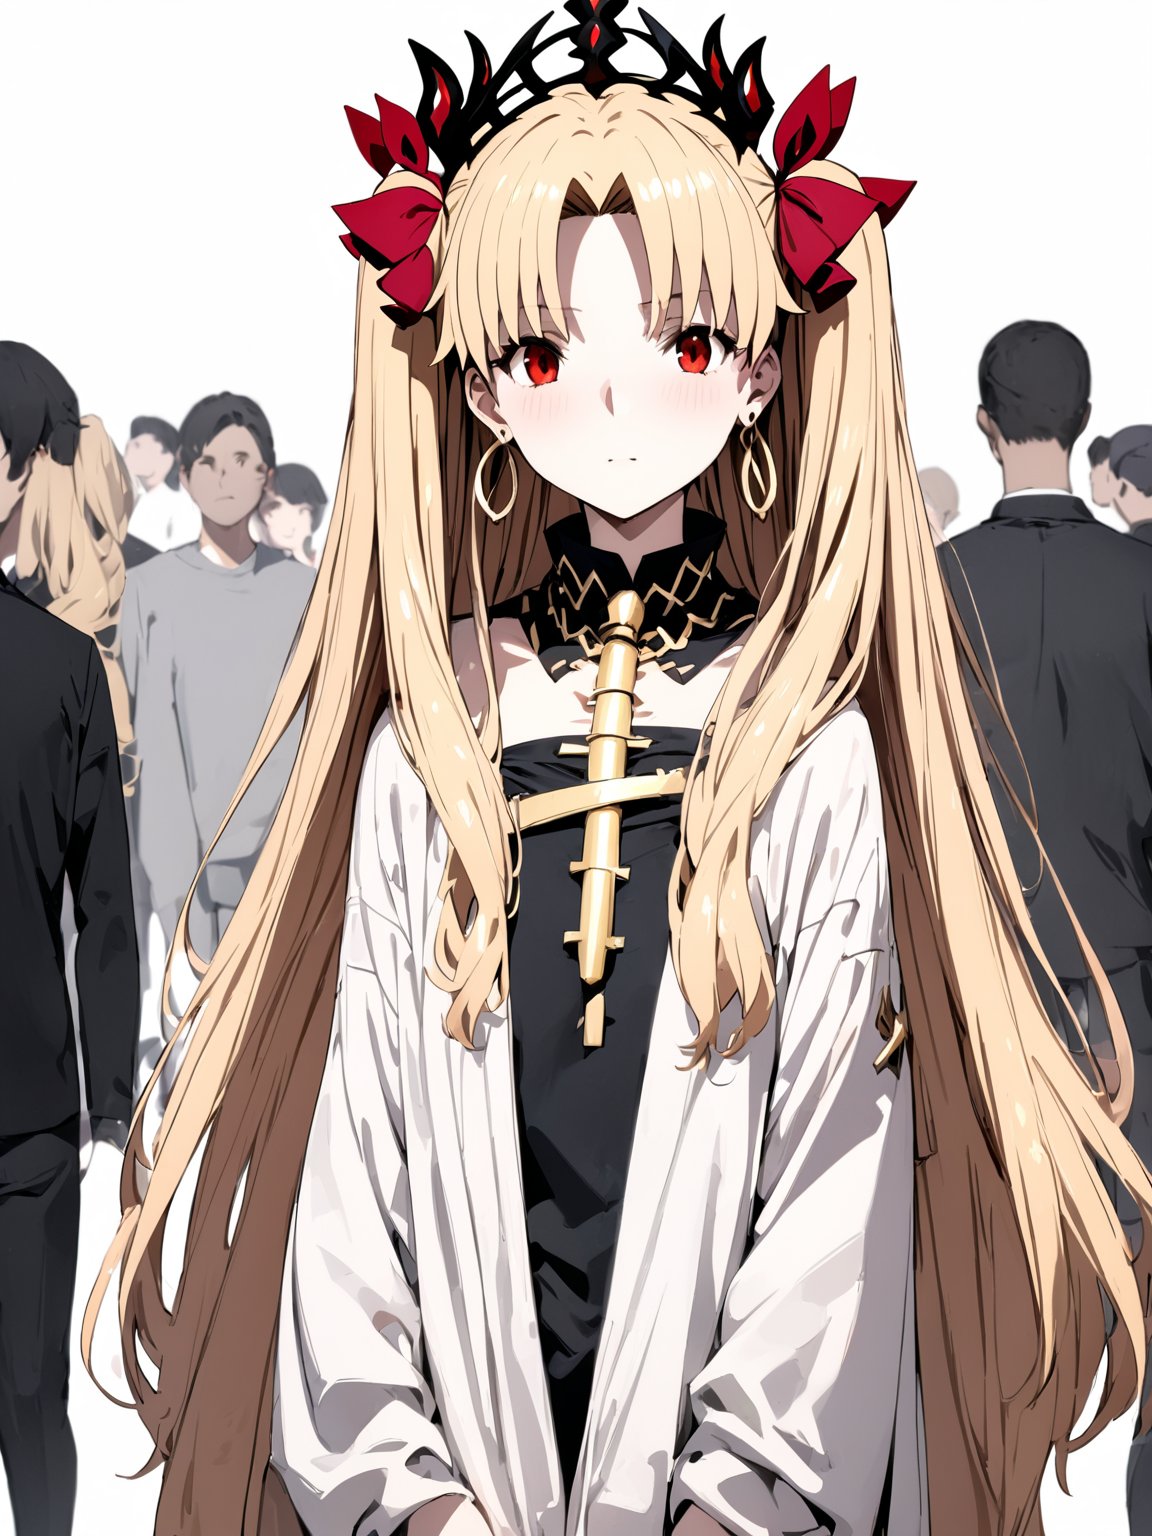 //Quality,
masterpiece, best quality, detailed
,//Character,
solo, 1girl
,//Fashion,
,//Background,
white_background
,//Others,
,ereshkigal \(fate\)